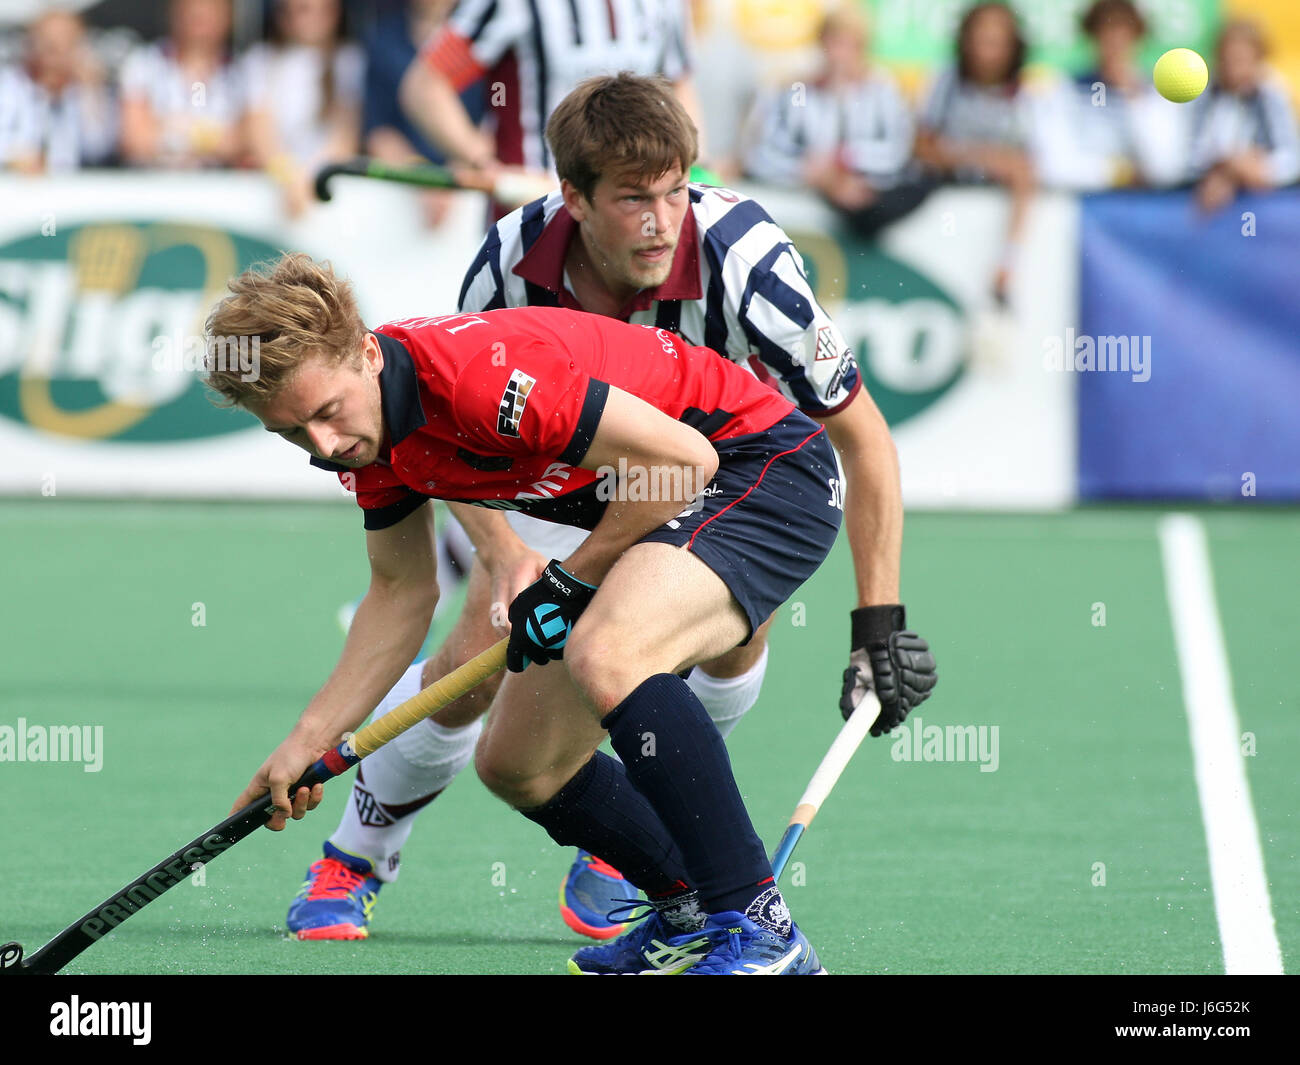 Leuven, Belgium. 21st May, 2017. Hockey final Play-off men Dragons Vs. Herakles, Luyten Thimothy of Dragons and Chils Marcus of Herakles in game actions. Credit: Leo Cavallo/Alamy Live News Stock Photo